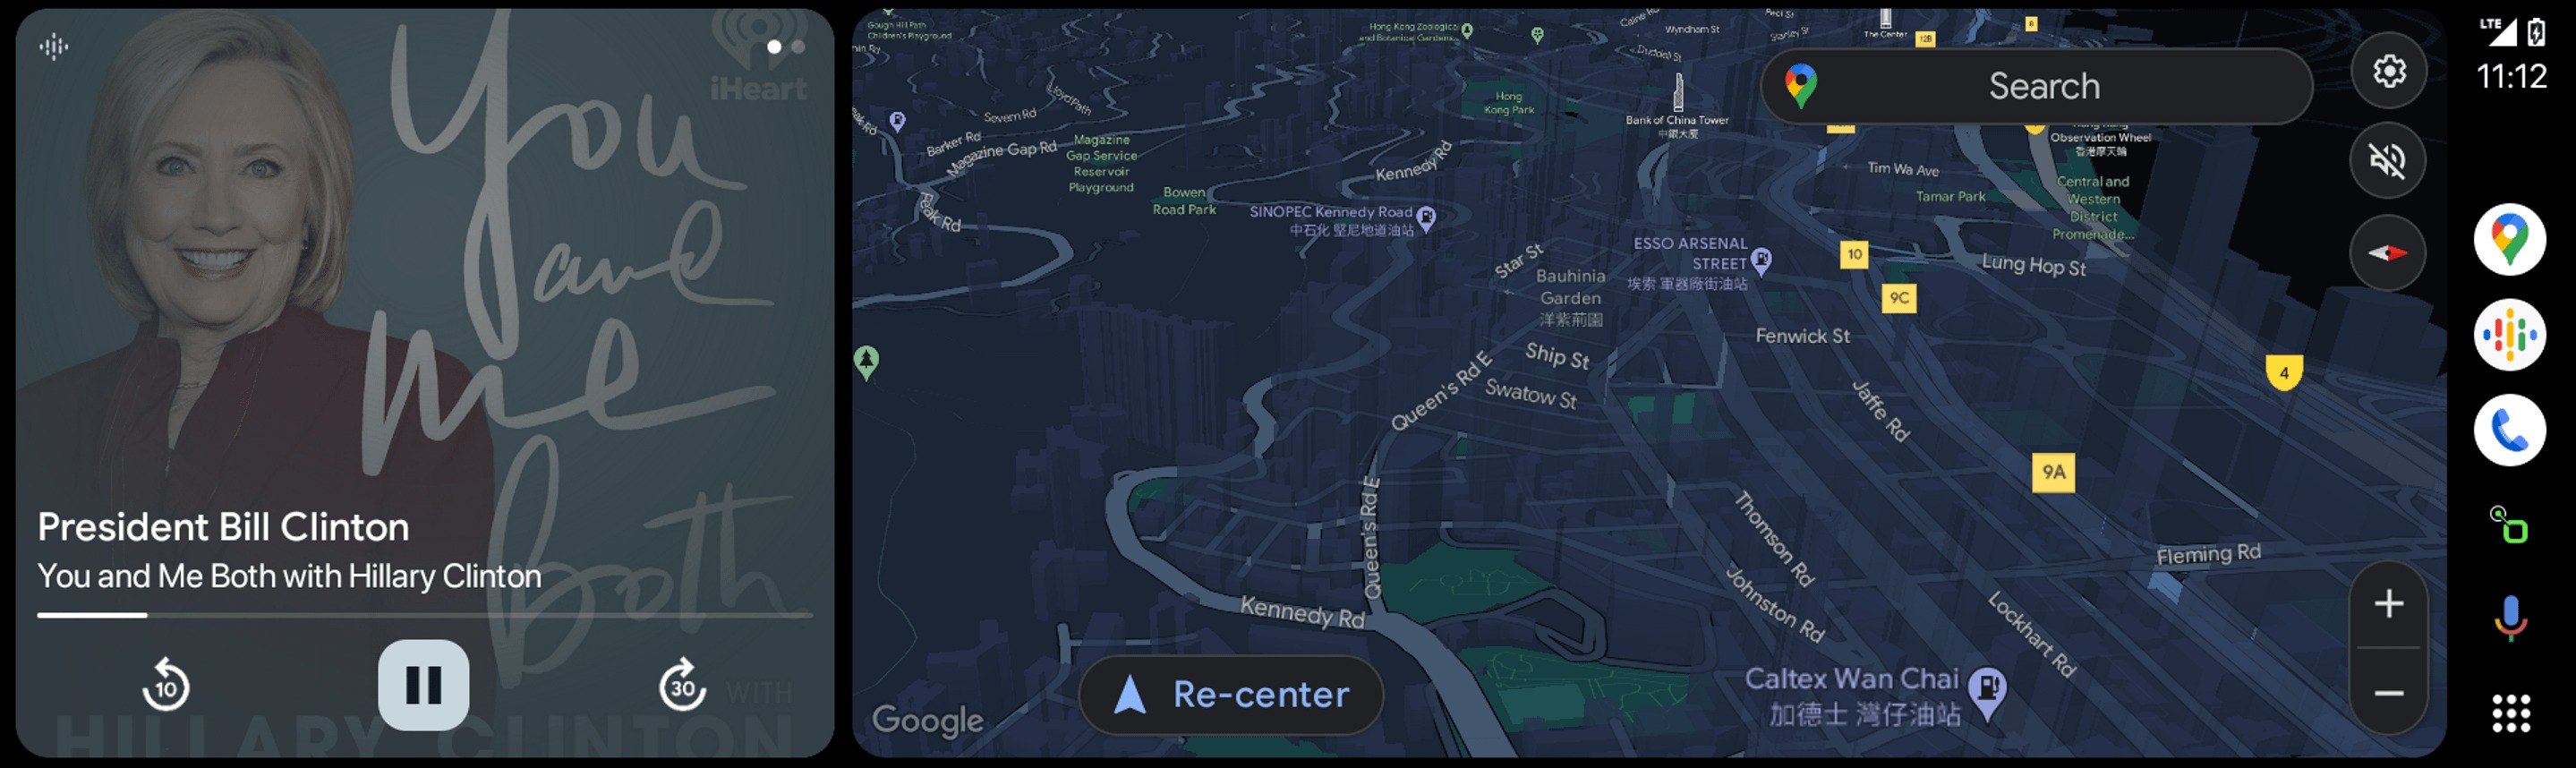 Google Maps on Android Auto showing 3D buildings while navigating